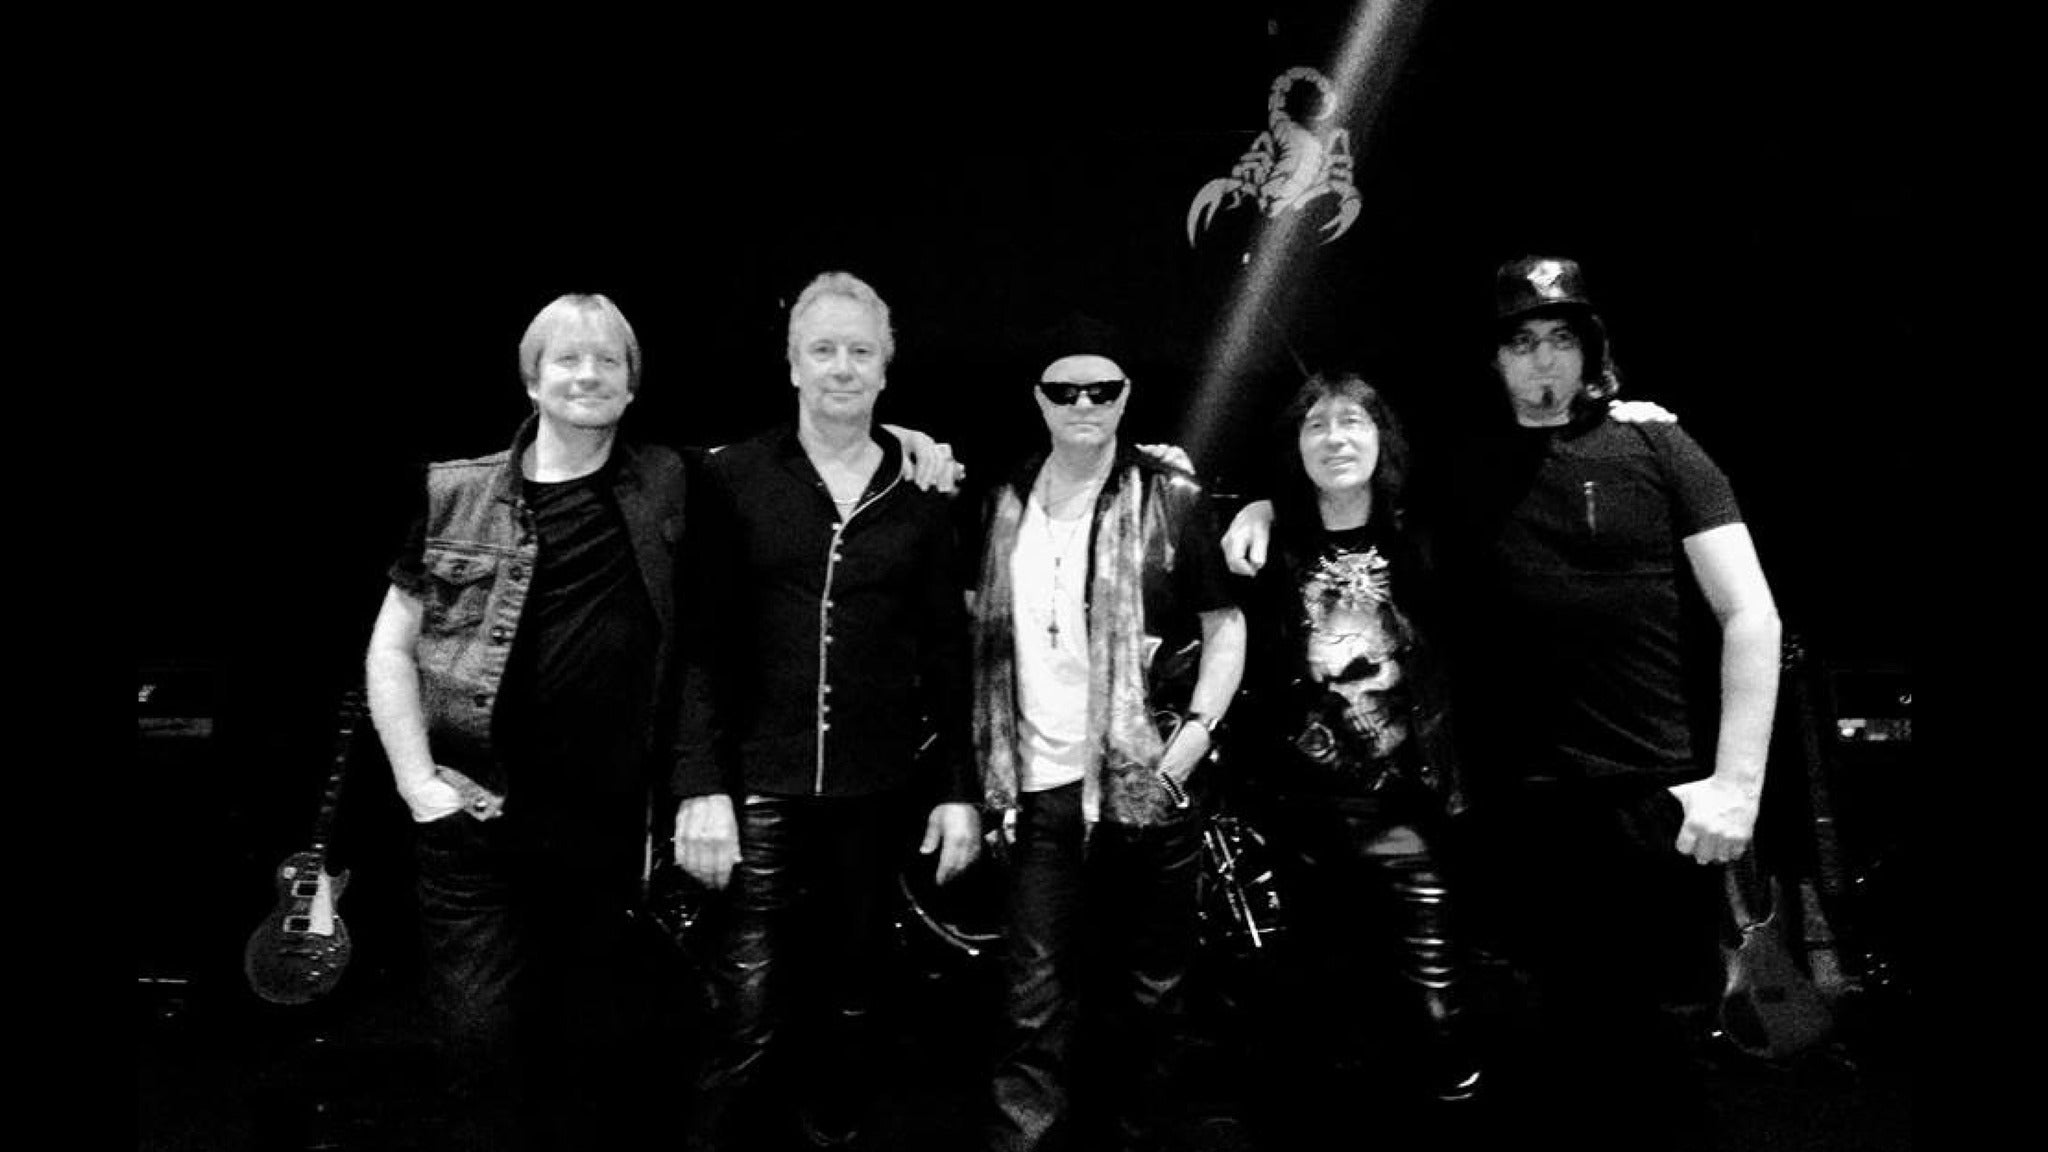 Blackout - The Scorpions Tribute Band Tickets, 2020 ...